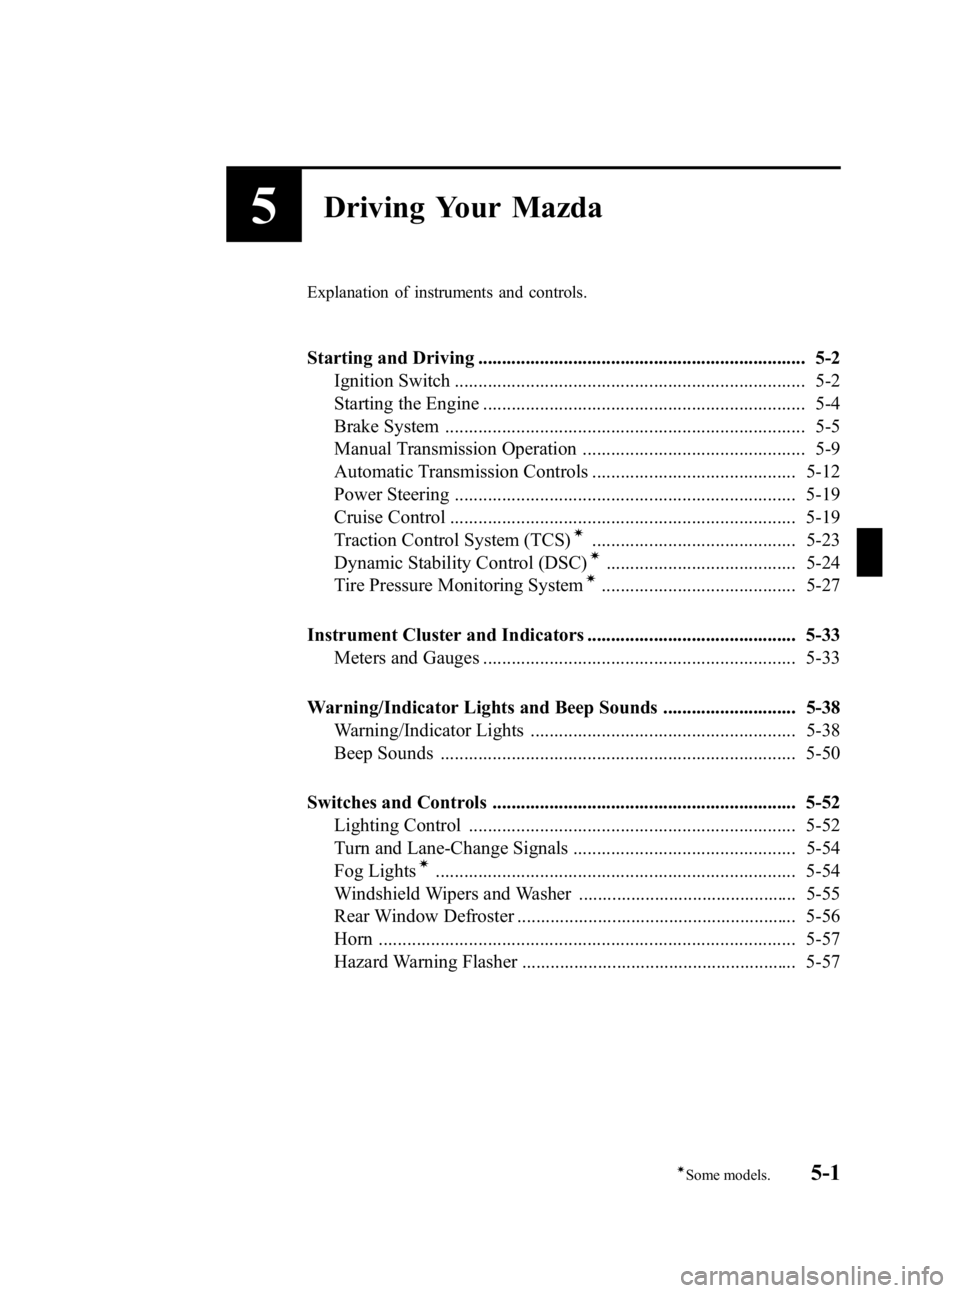 MAZDA MODEL MX-5 MIATA 2006  Owners Manual Black plate (137,1)
5Driving Your Mazda
Explanation of instruments and controls.
Starting and Driving ..................................................................... 5-2Ignition Switch .........